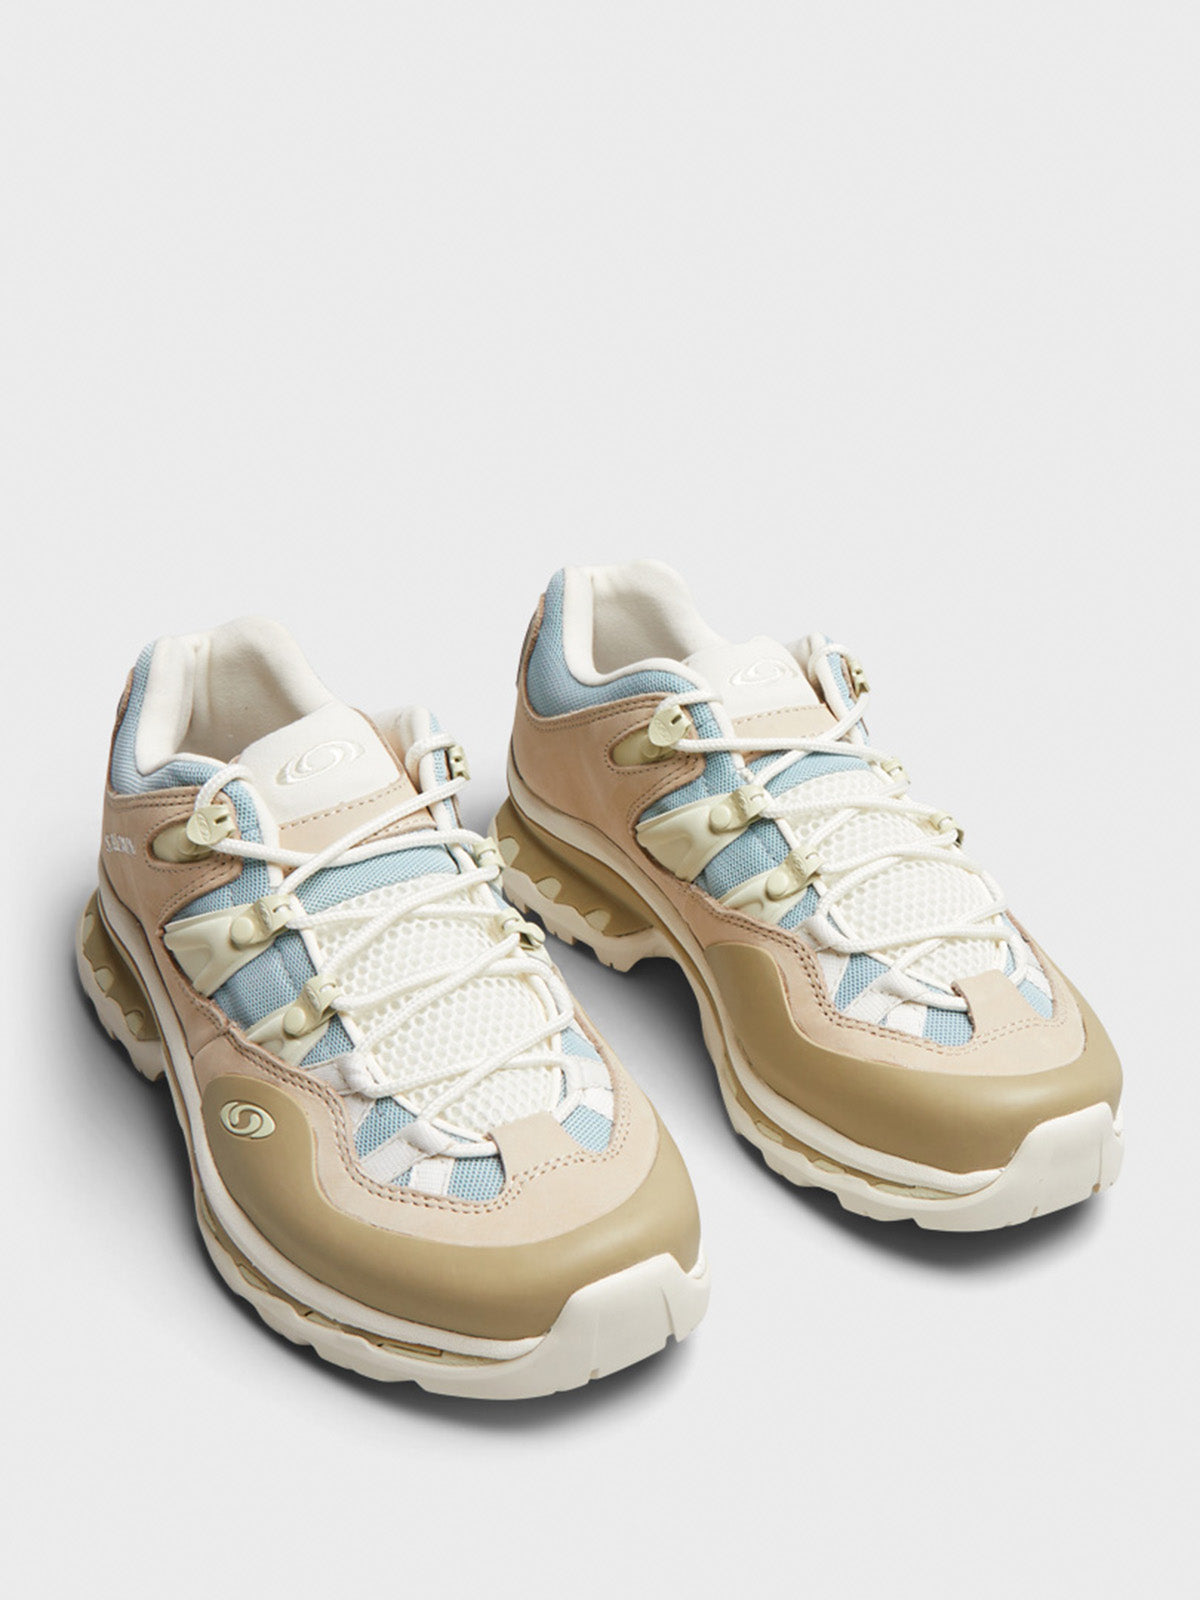 XT-Quest 2 Sneakers in Winter Pear, Sterling Blue and Salte Green